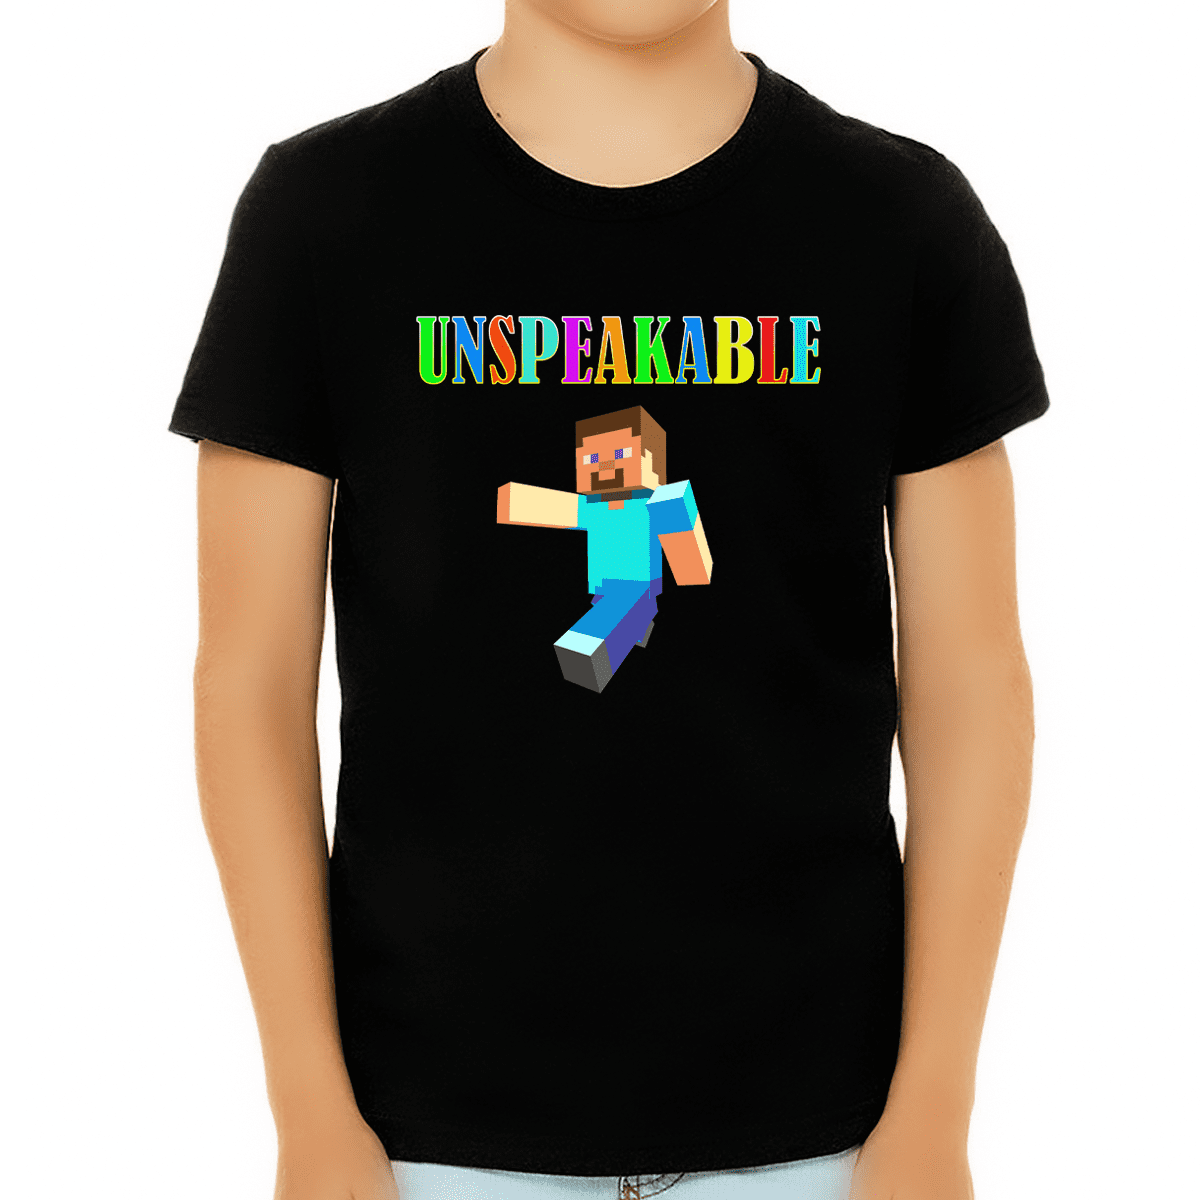 Fire Fit Designs Unspeakable Shirt Unspeakable Merch For Boys